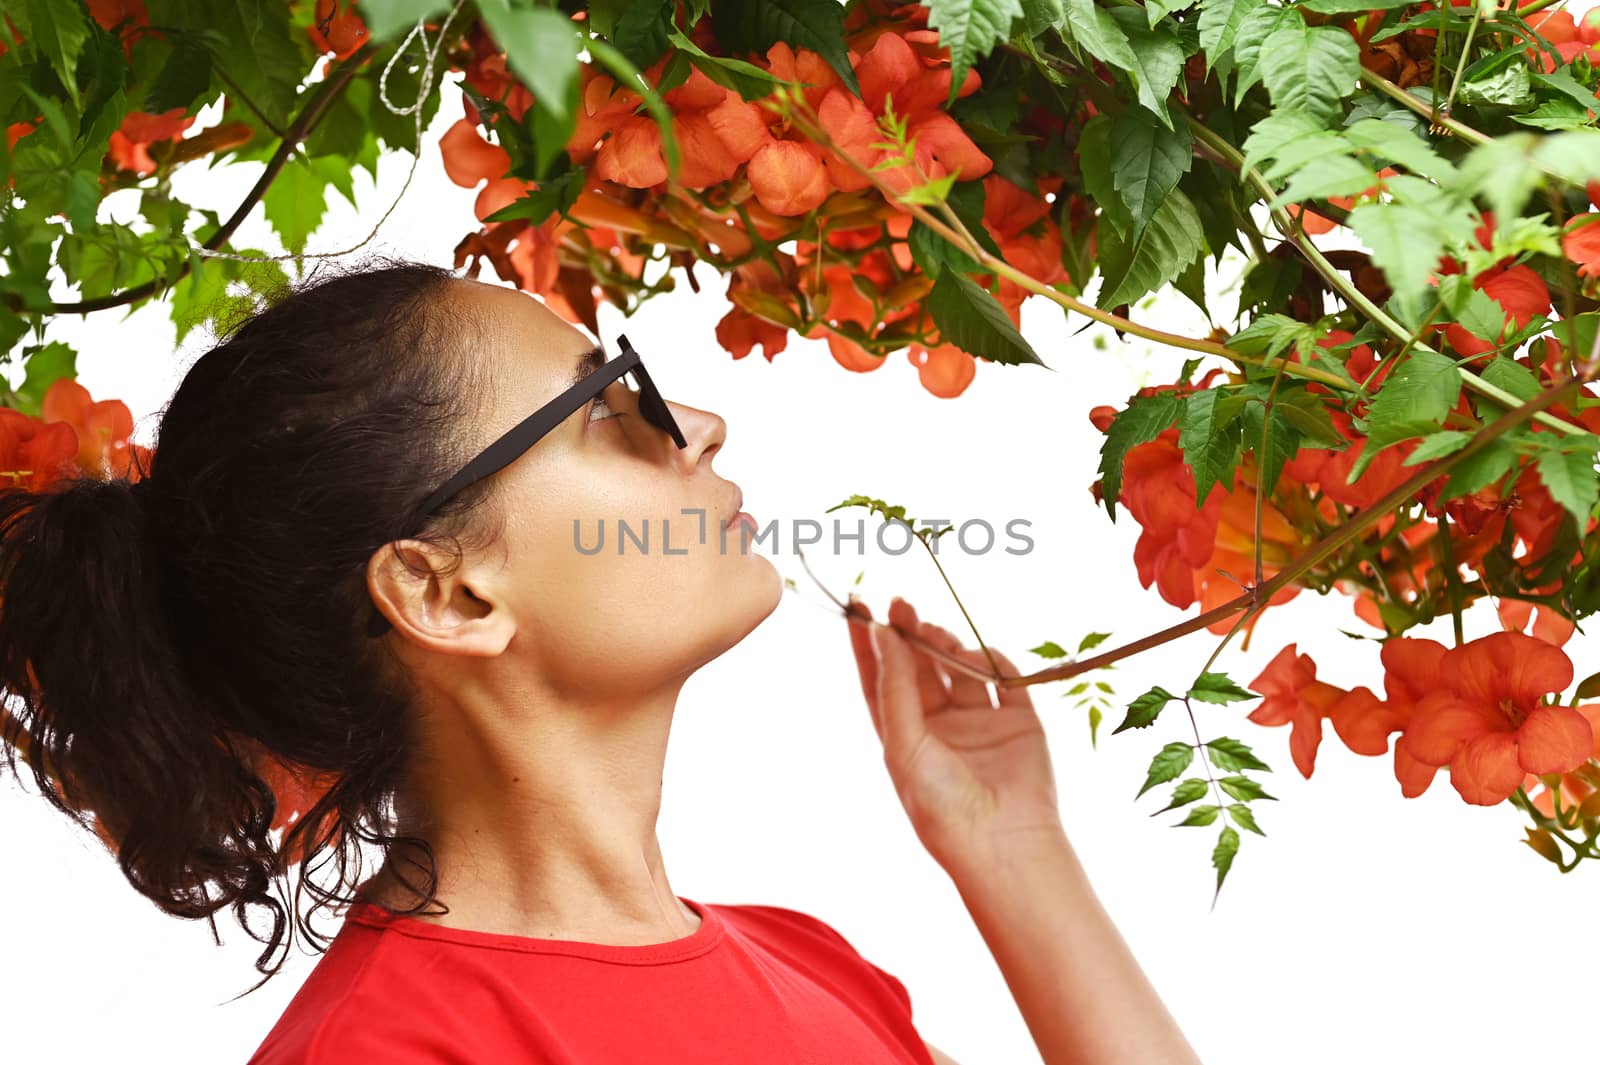 Beautiful young woman smelling red flowers in the park. Sarajevo, Bosnia and Herzegovina